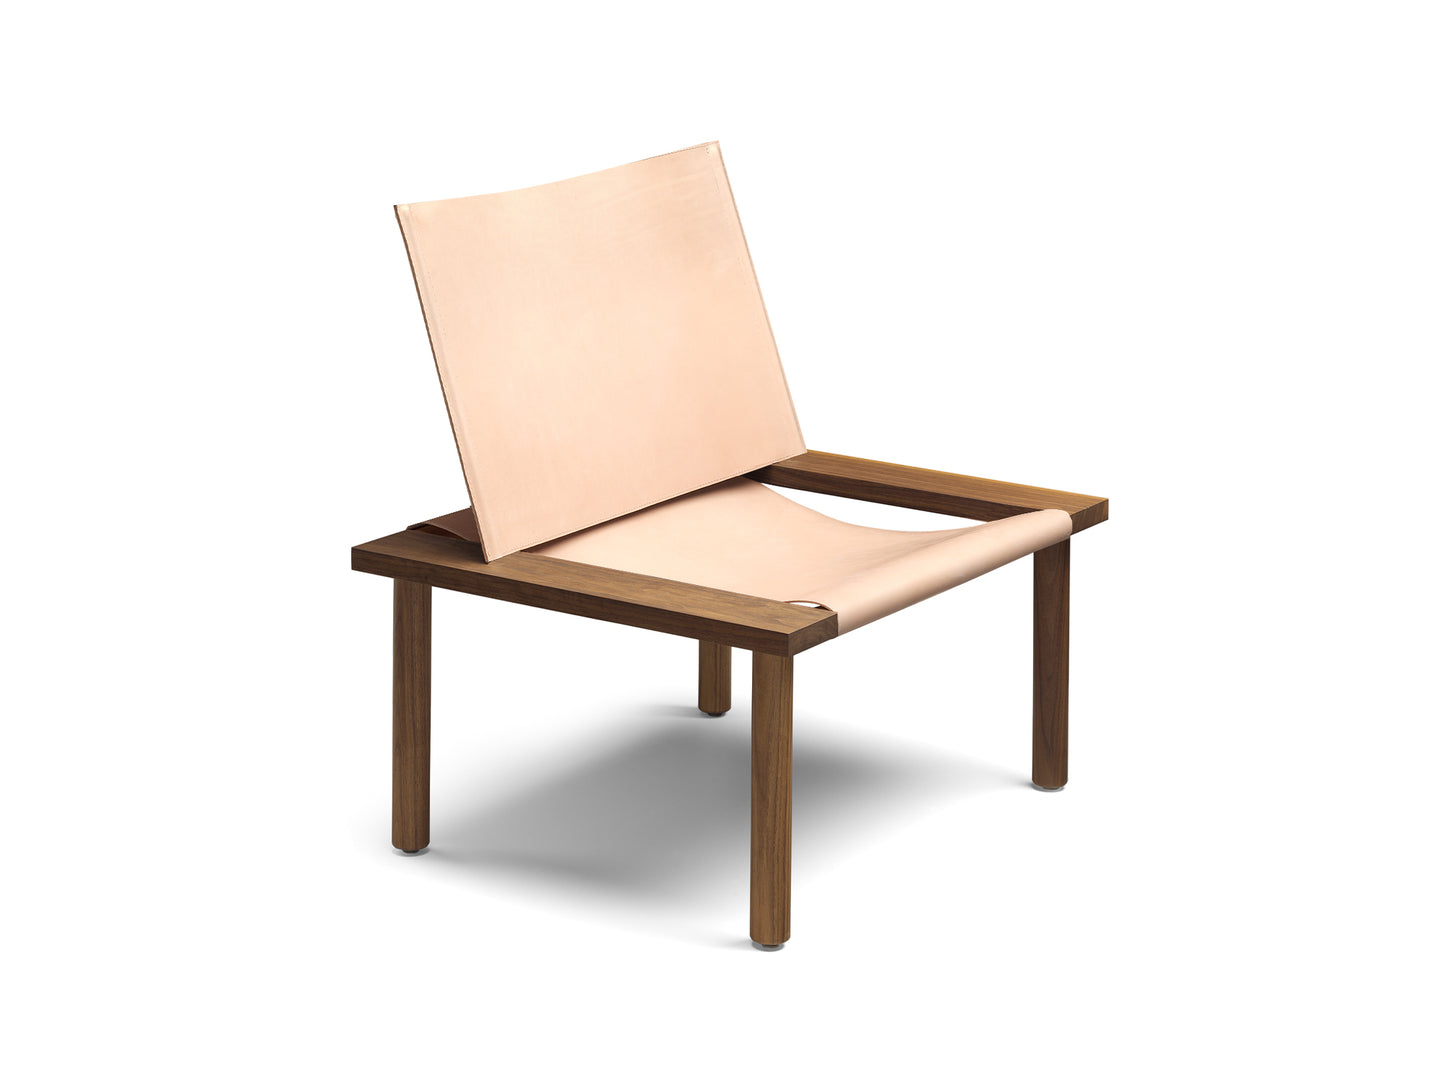 EC06 Ilma Lounge Chair by e15 - Waxed Walnut / Natural Harness Leather